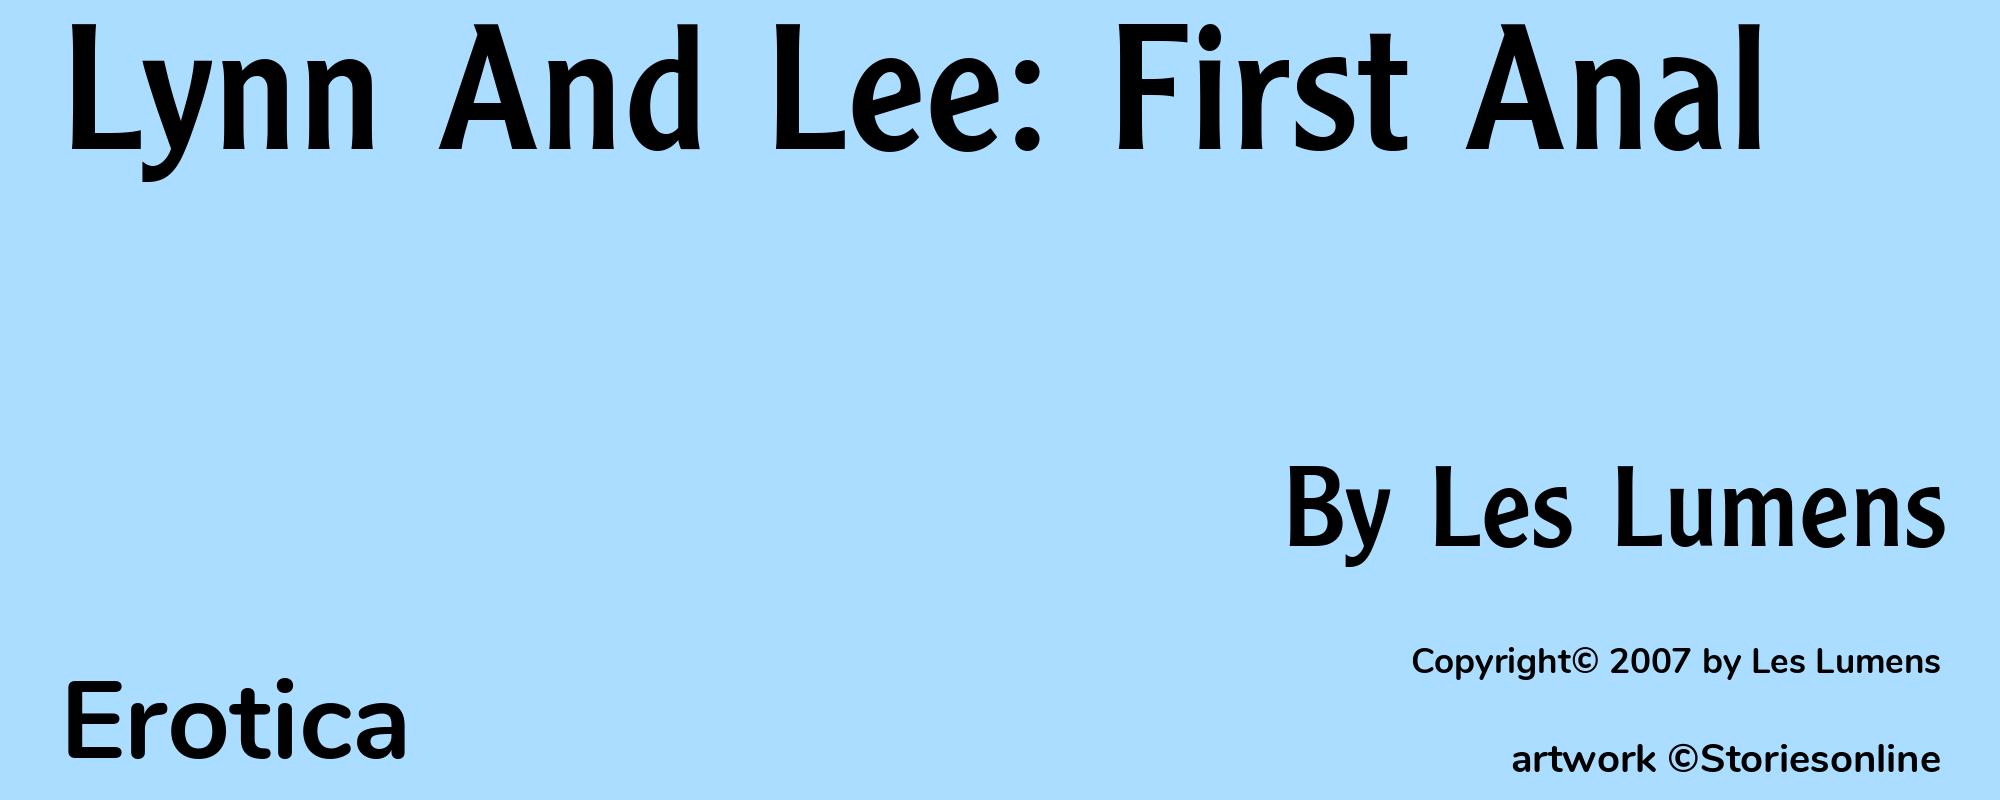 Lynn And Lee: First Anal - Cover